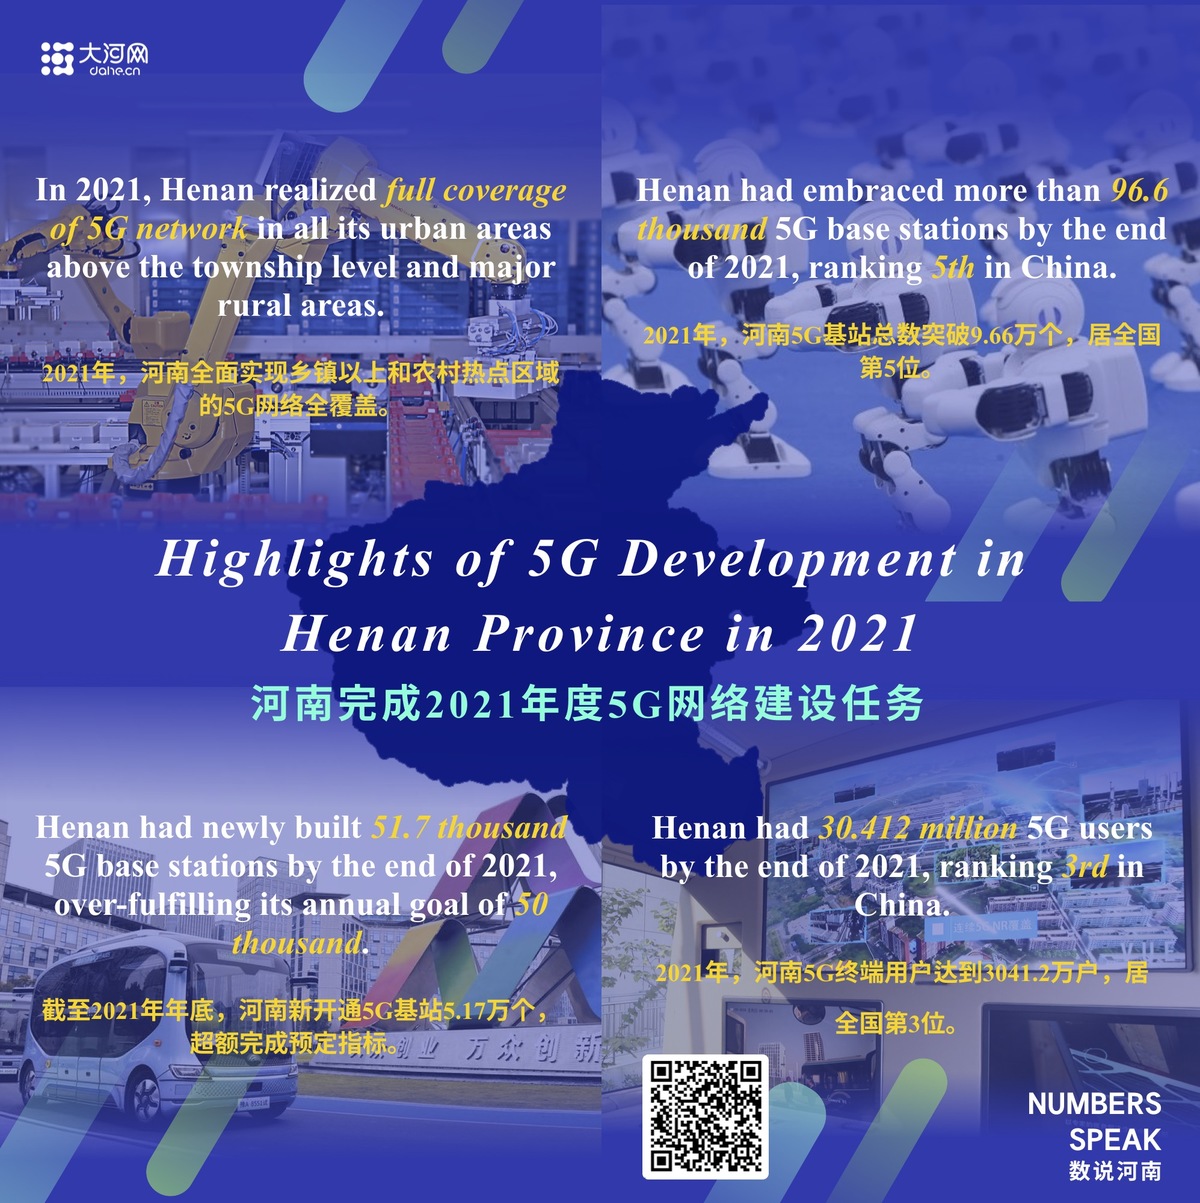 Highlights of 5G Development in Henan Province in 2021